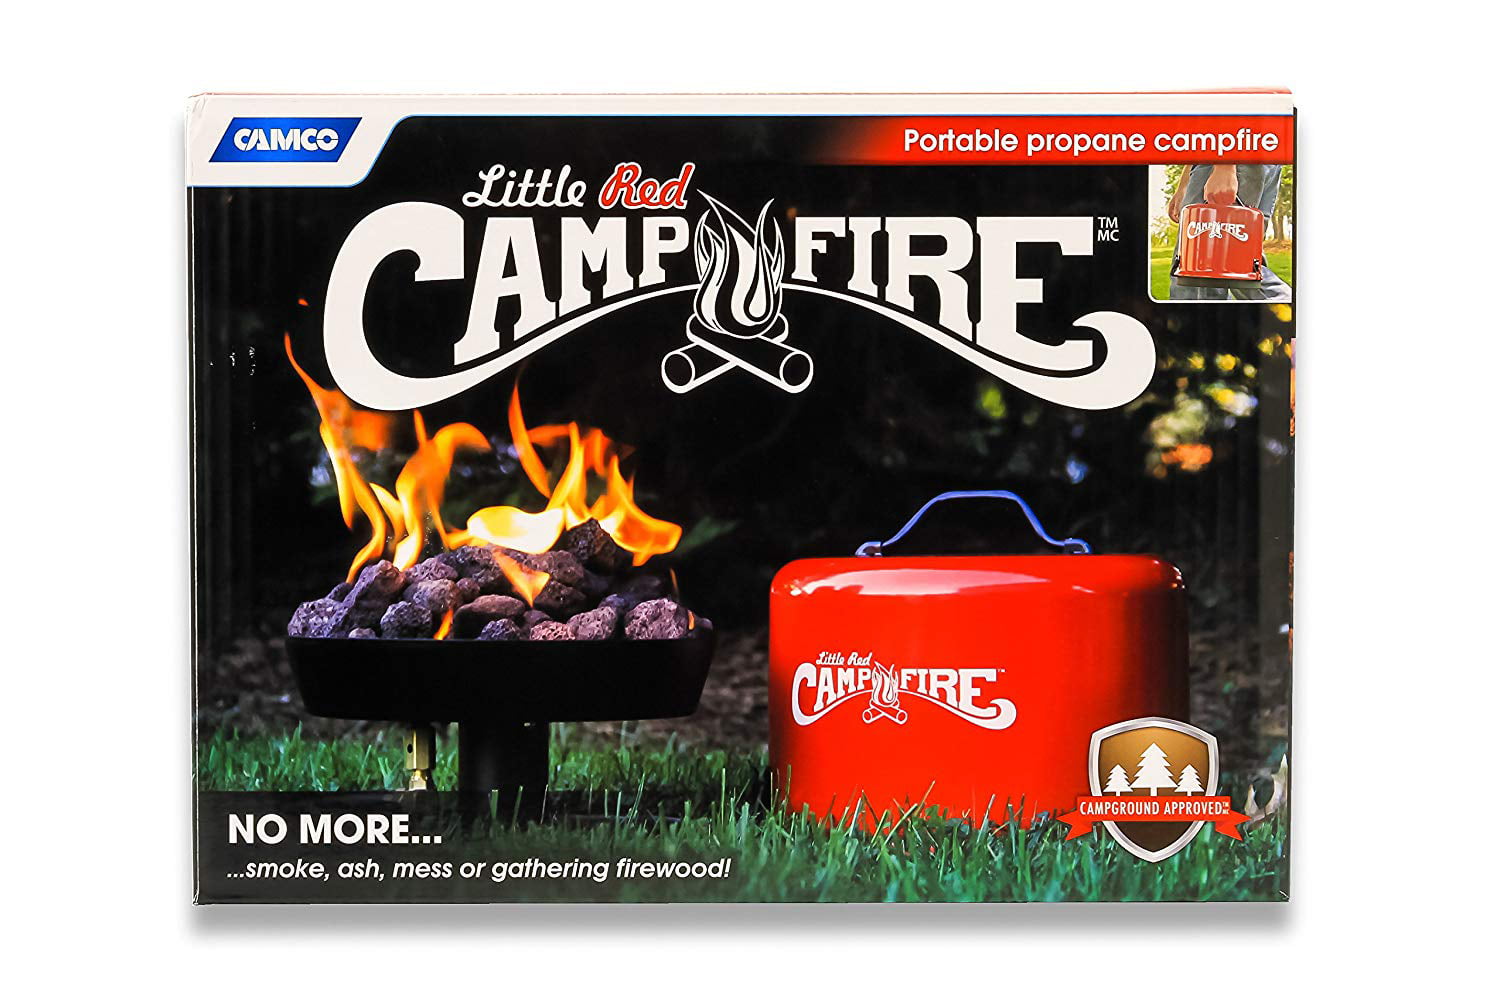 Camco Little Red Campfire 11 25 Inch, Camco Fire Pit